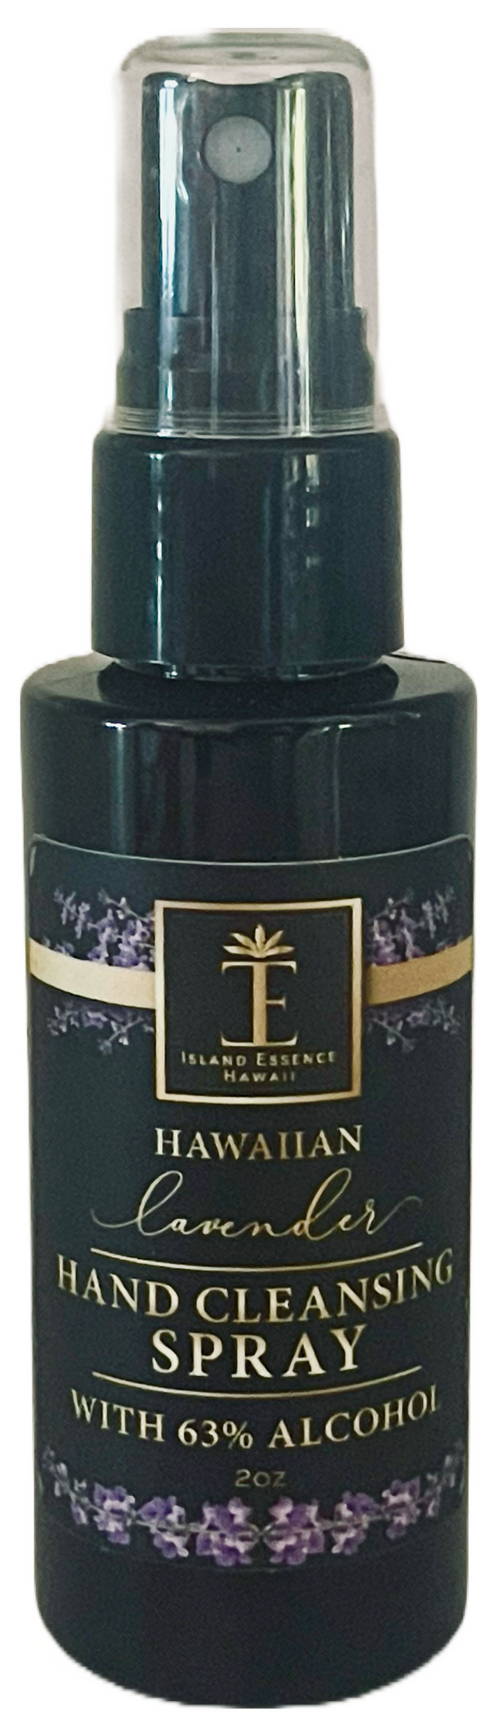 Island Essence Hawaii Hand Cleansing Spray from Maui (Choose Scent)